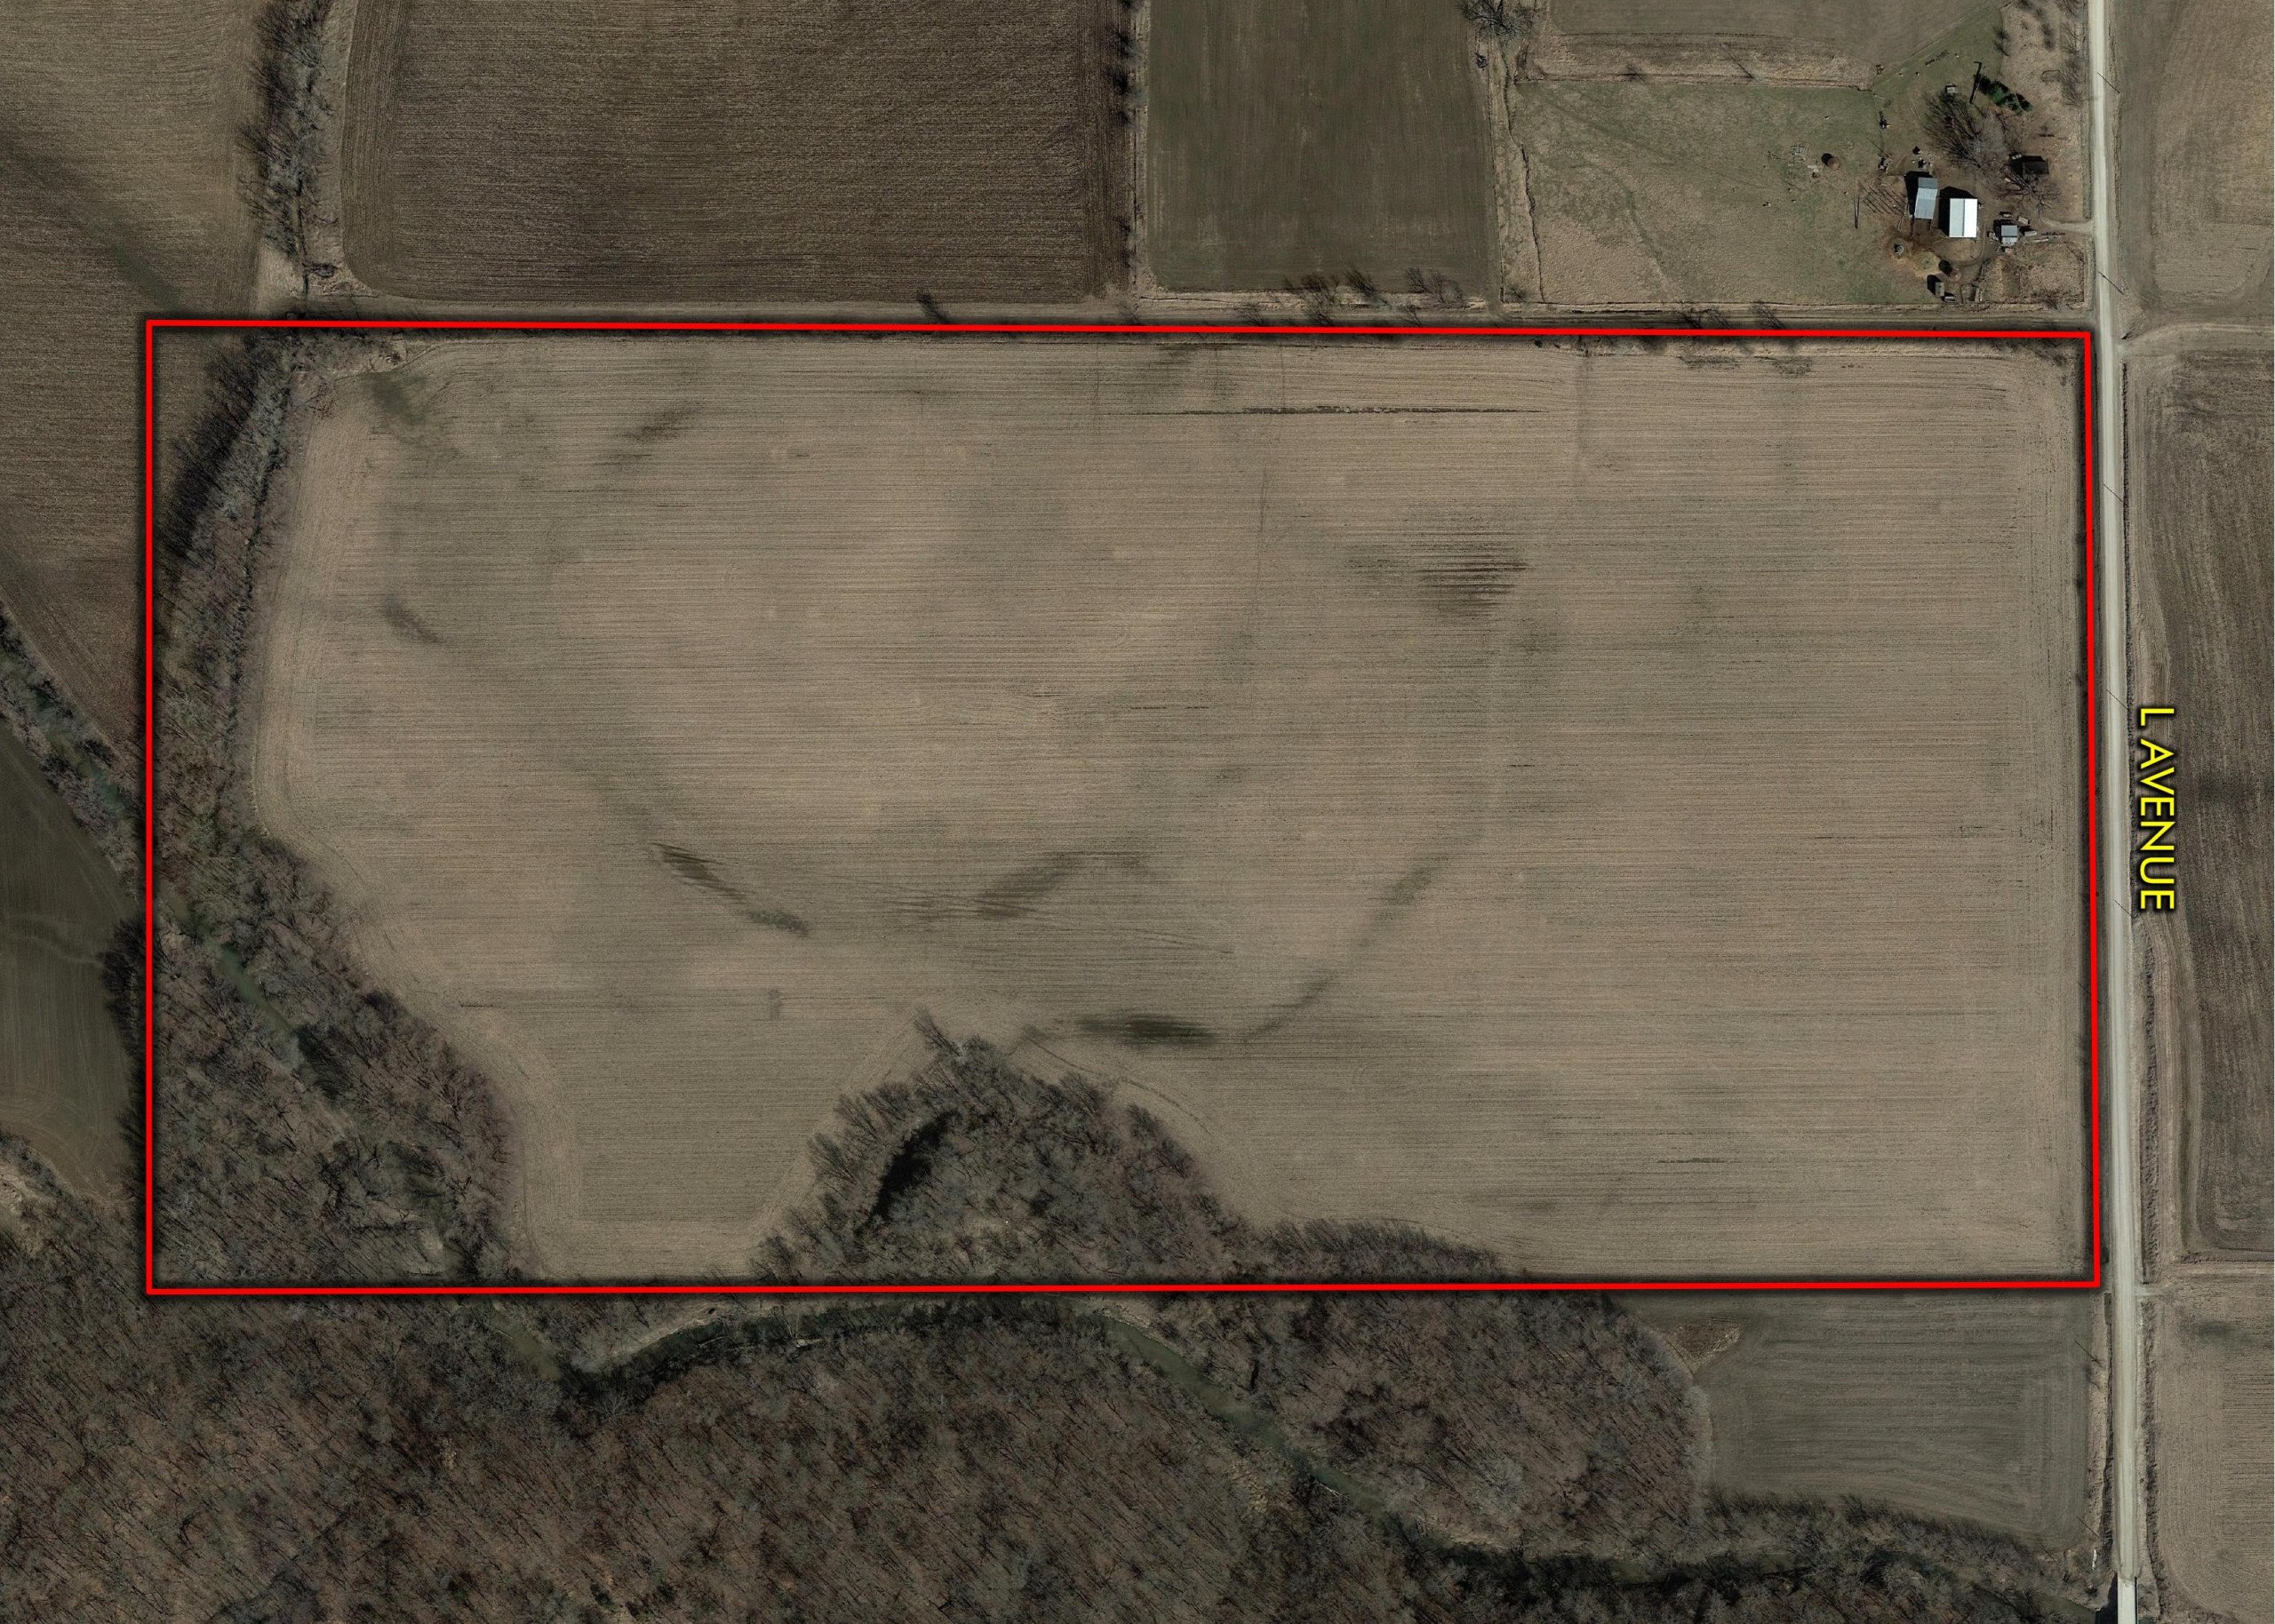 auctions-land-iowa-county-iowa-80-acres-listing-number-16051-0001-2.jpg